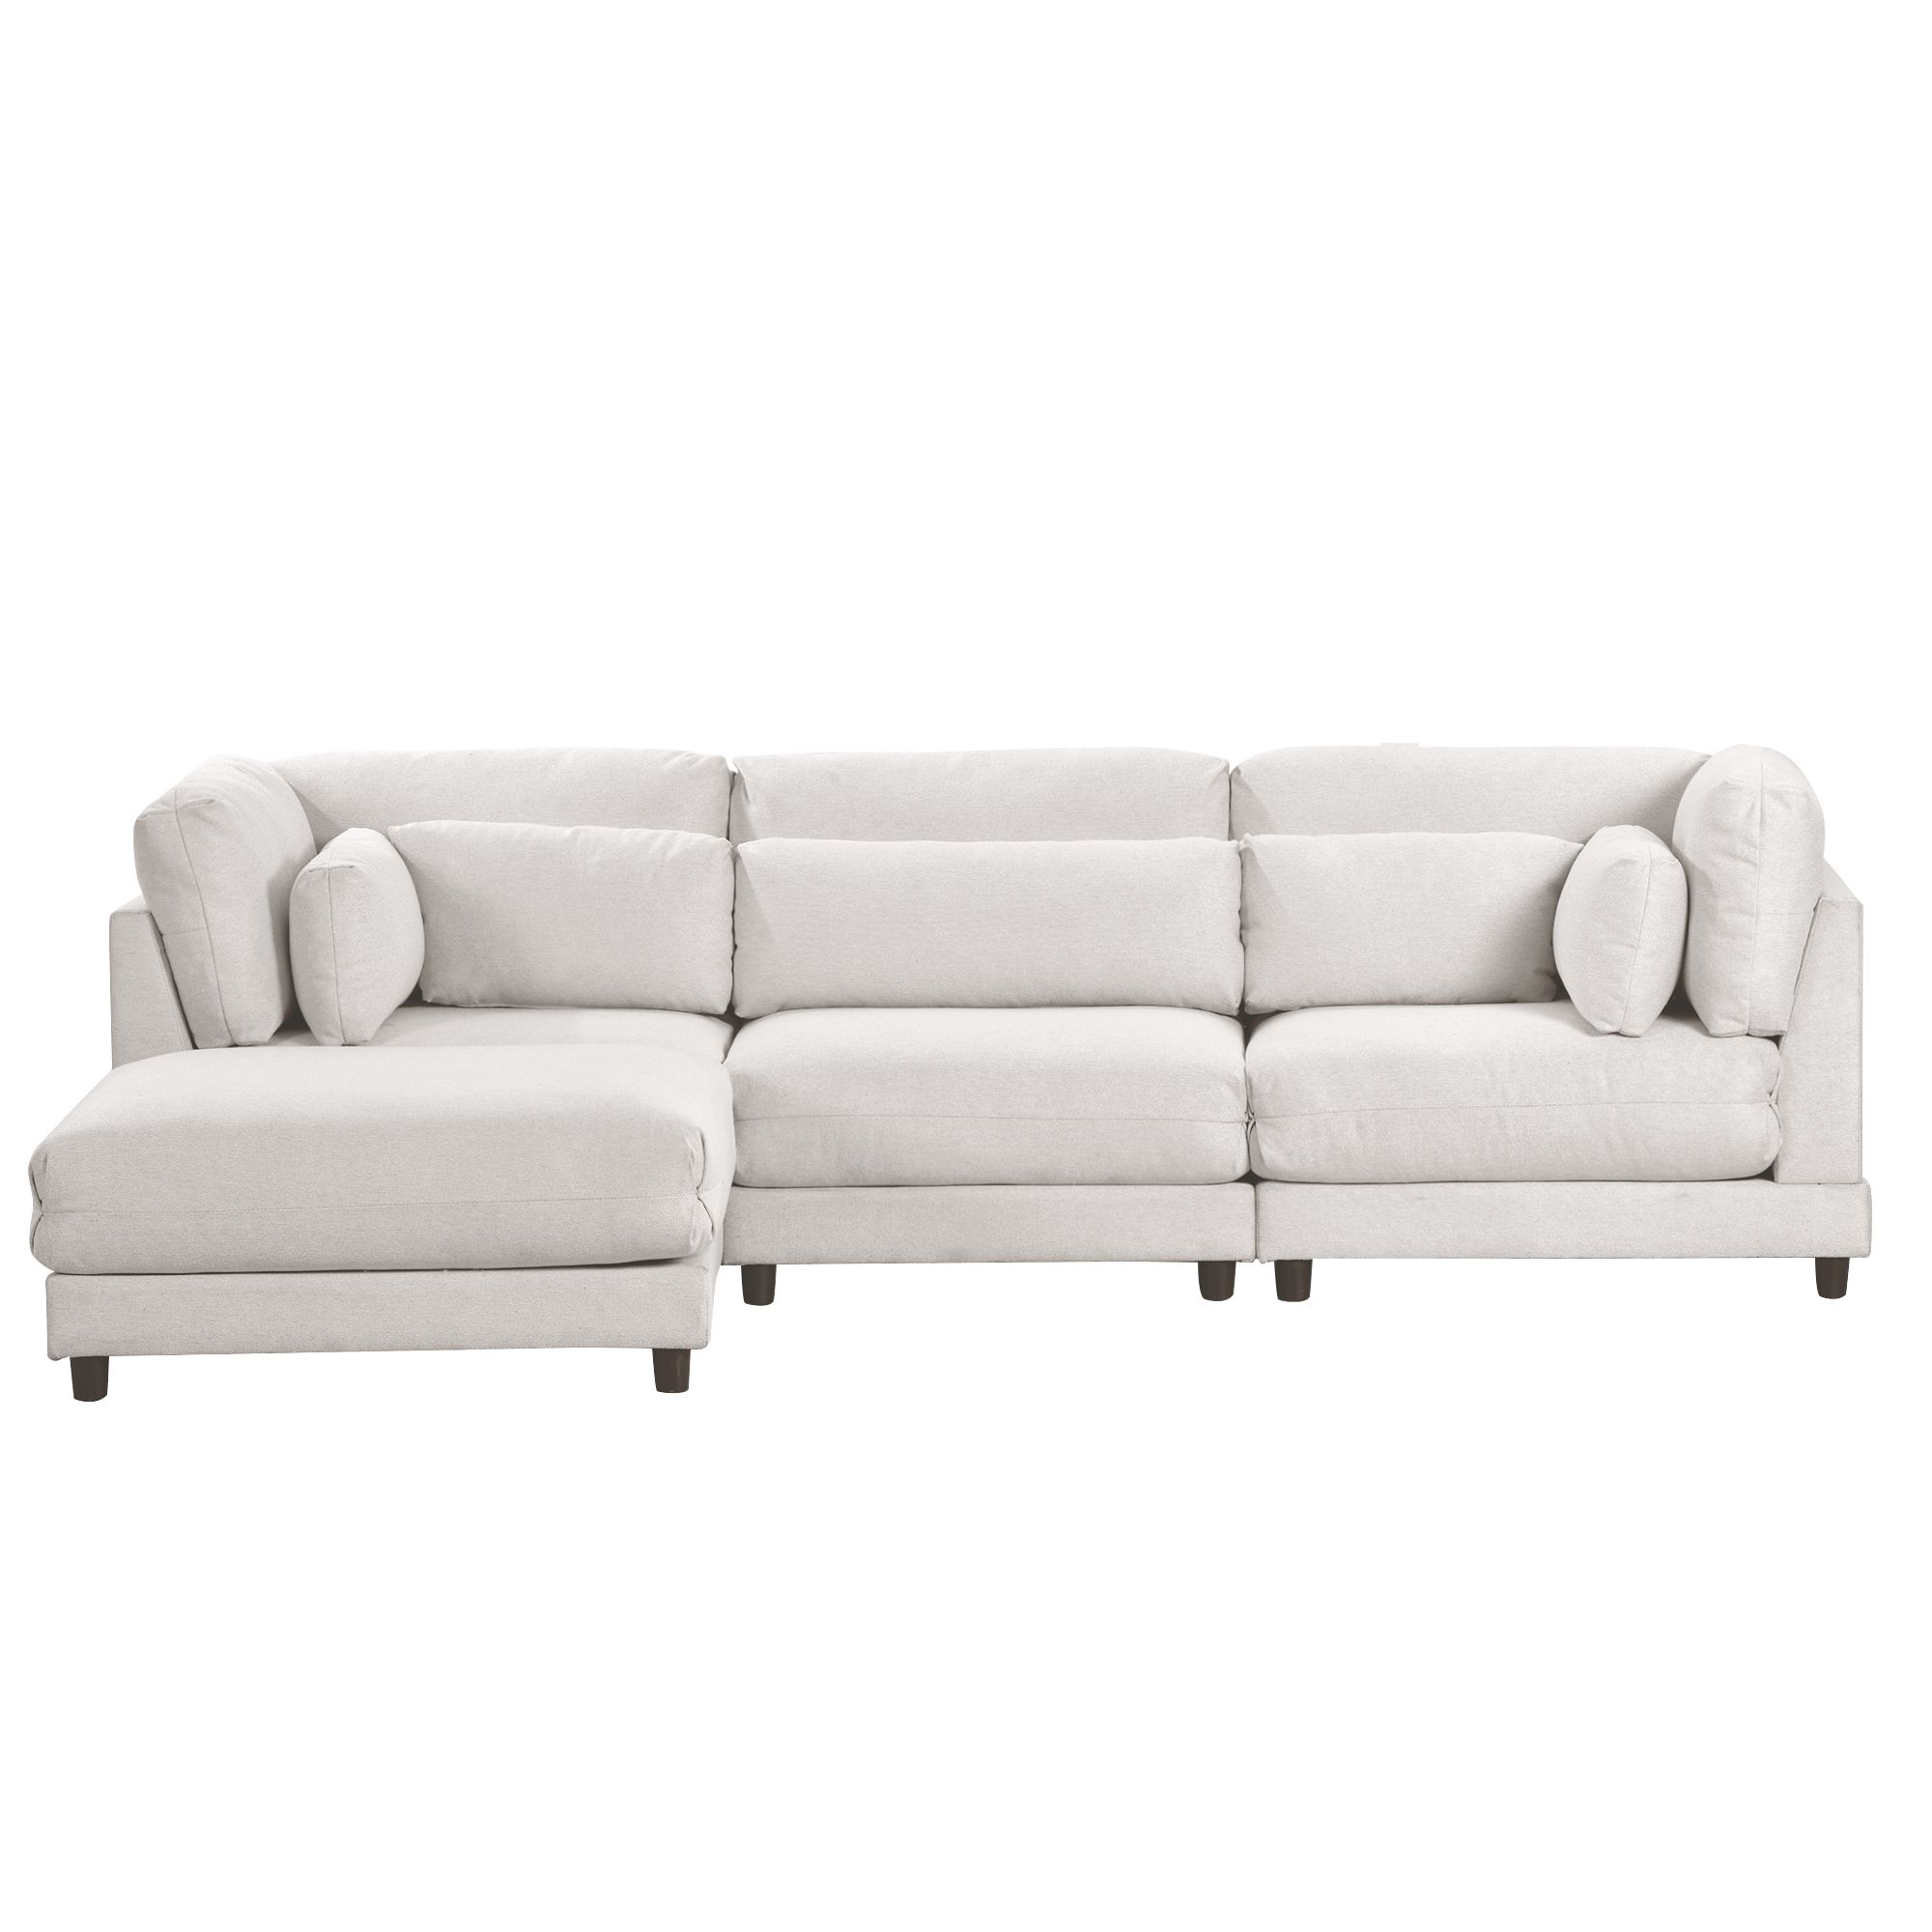 Euroco L Shaped Sofa with Removable Ottoman, 4 Seater Living Room Sofa with Waist Pillows, 110", ... | Walmart (US)